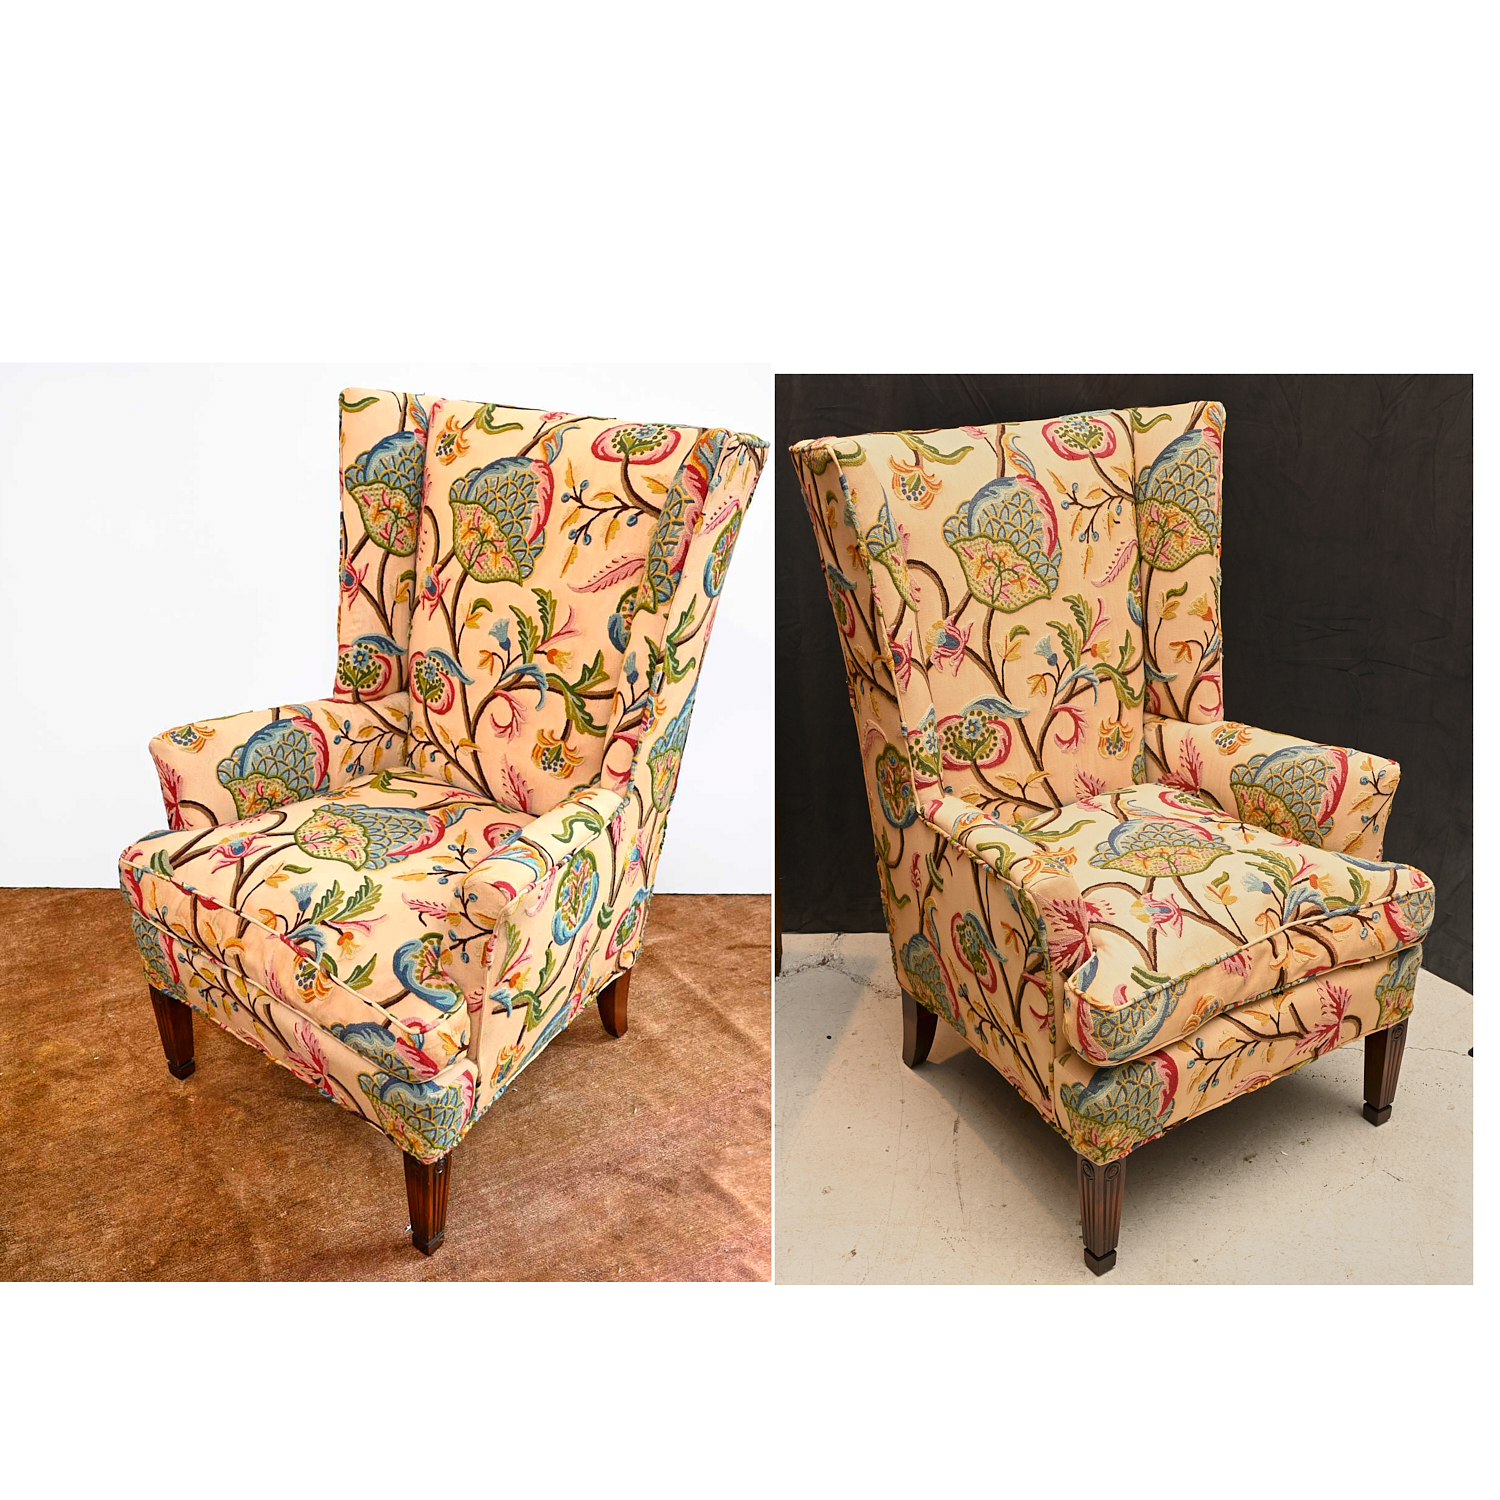 NICE PAIR CREWELWORK UPHOLSTERED 2ce640